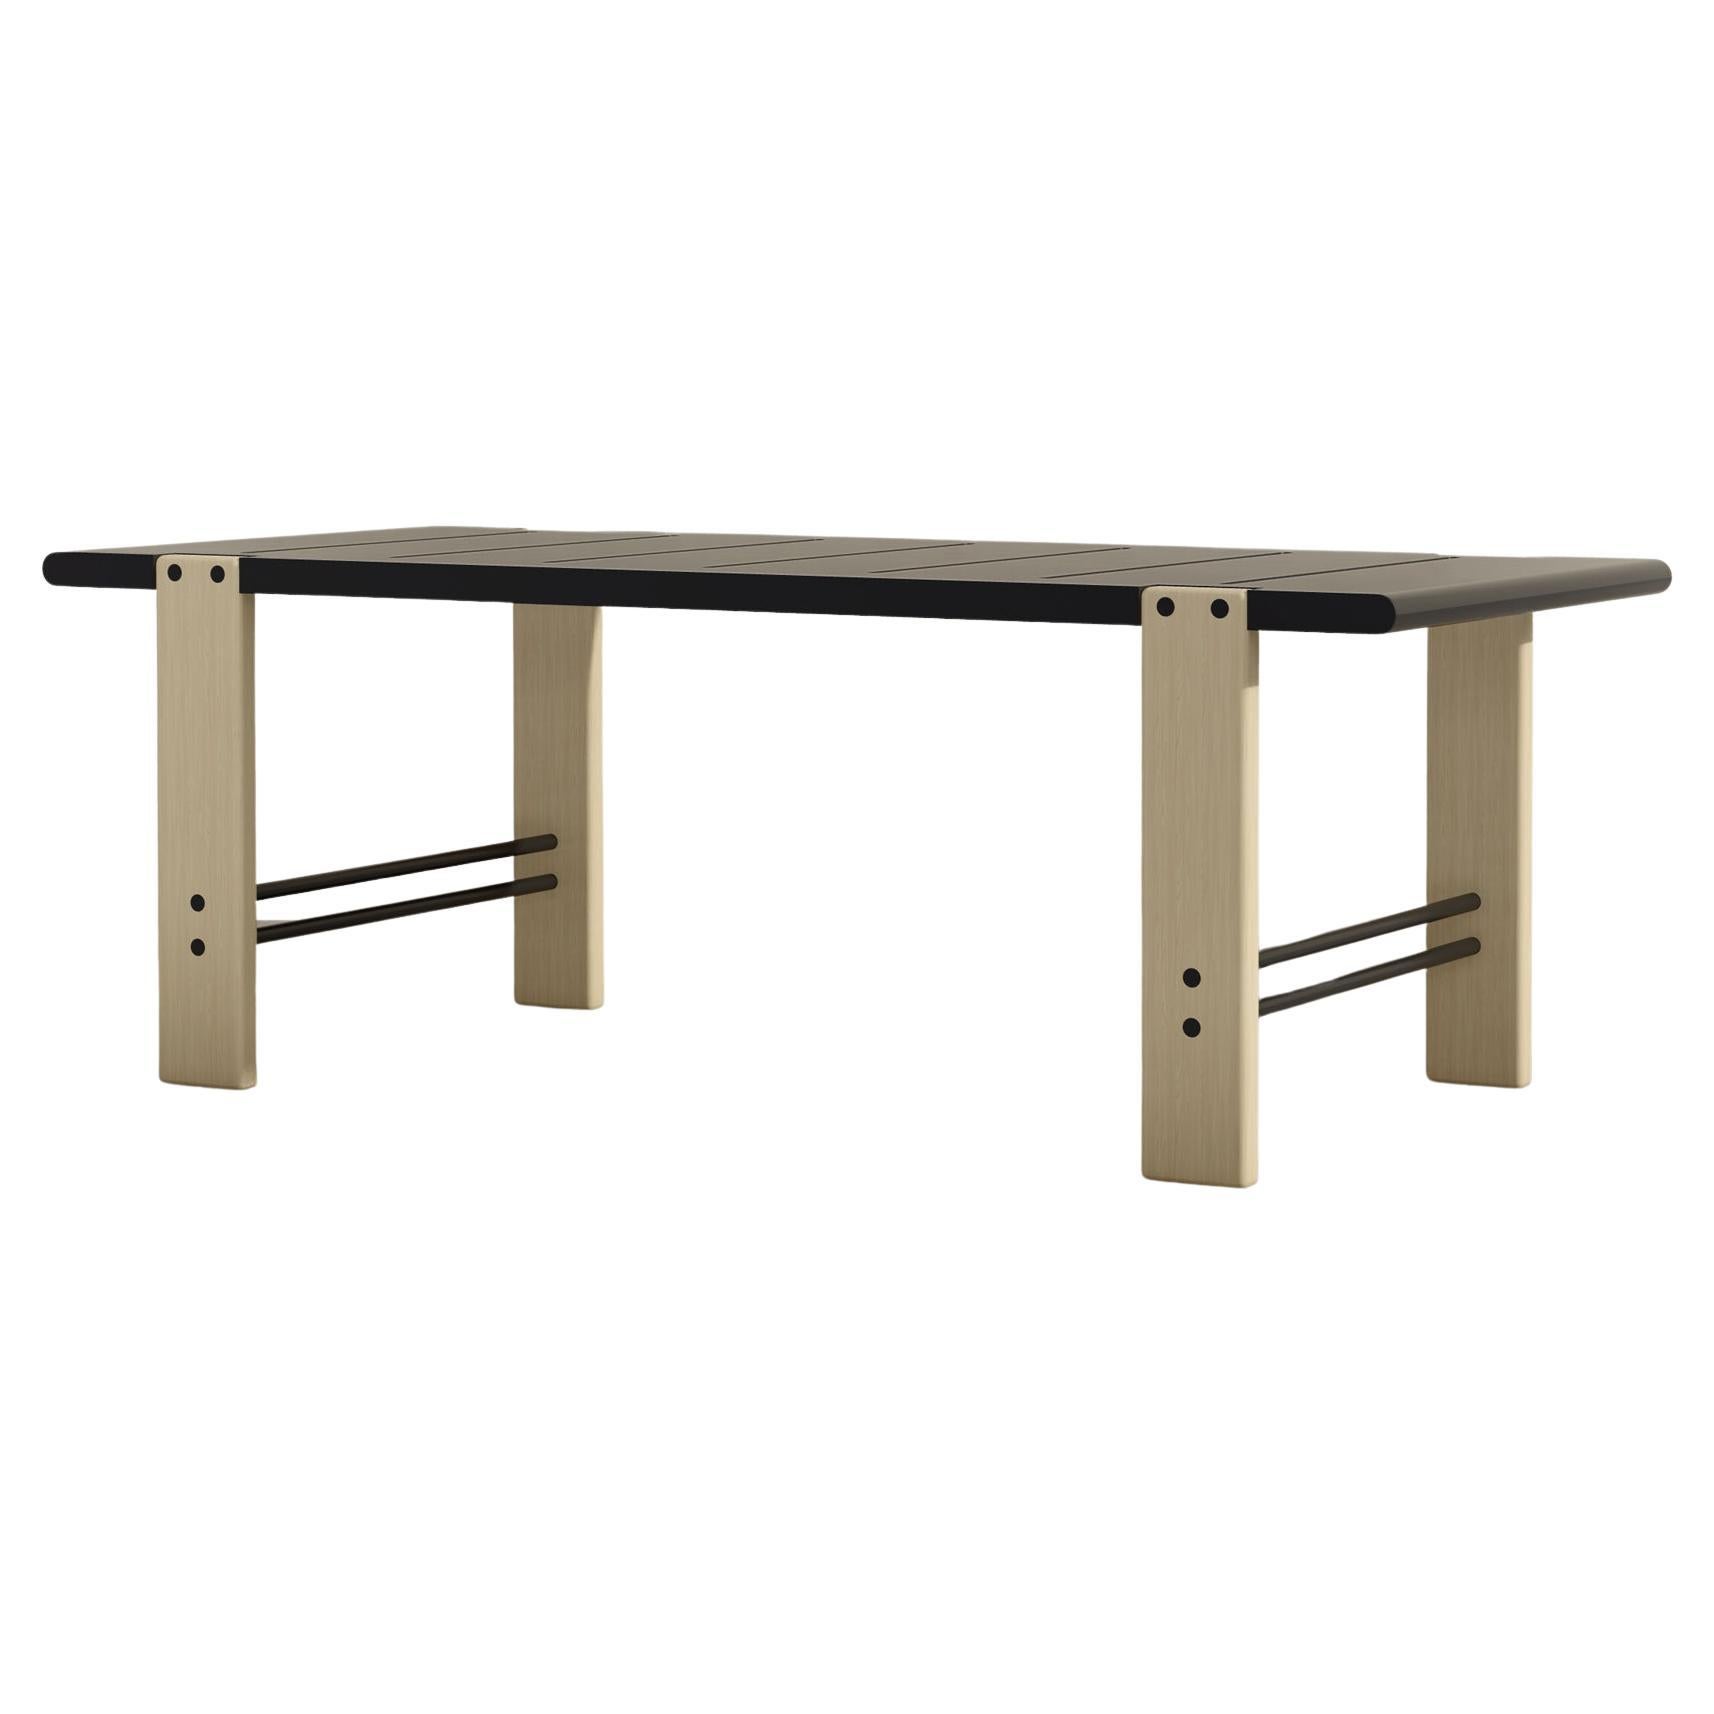 Outdoor Dining Table 0:1 For Sale